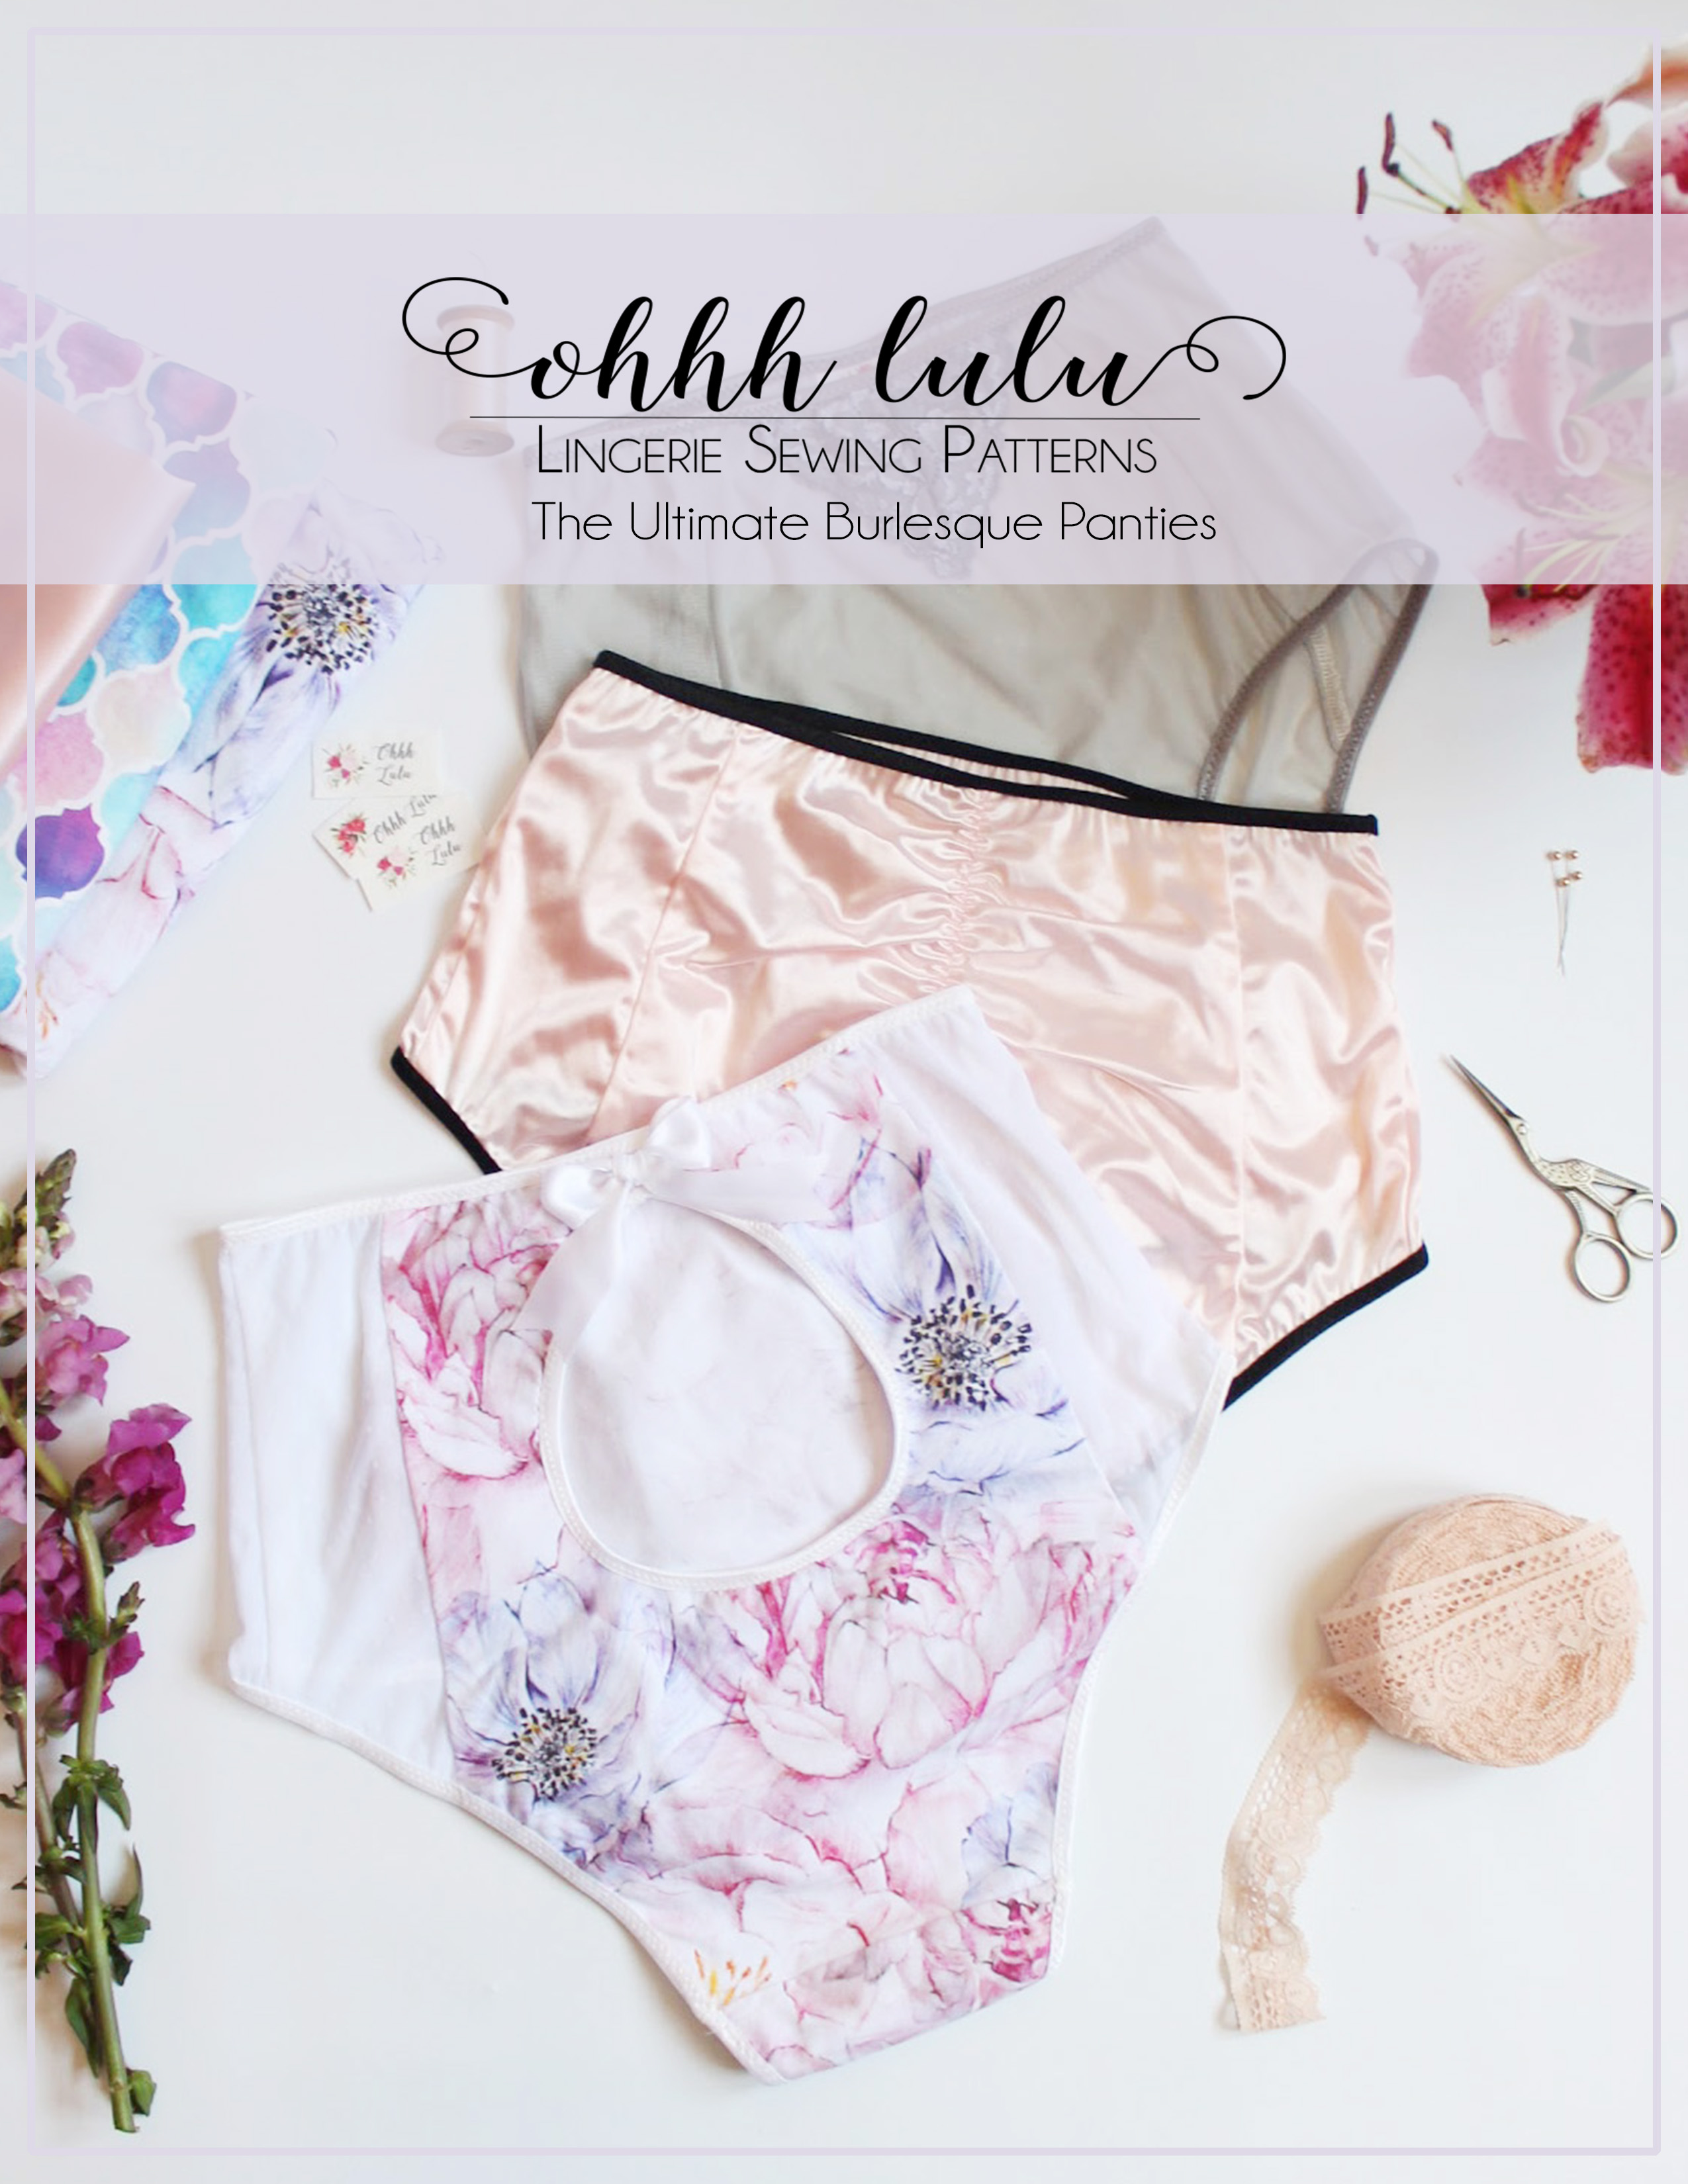 The Ultimate Burlesque High Waist Panties PDF Sewing Pattern – Ohhh Lulu